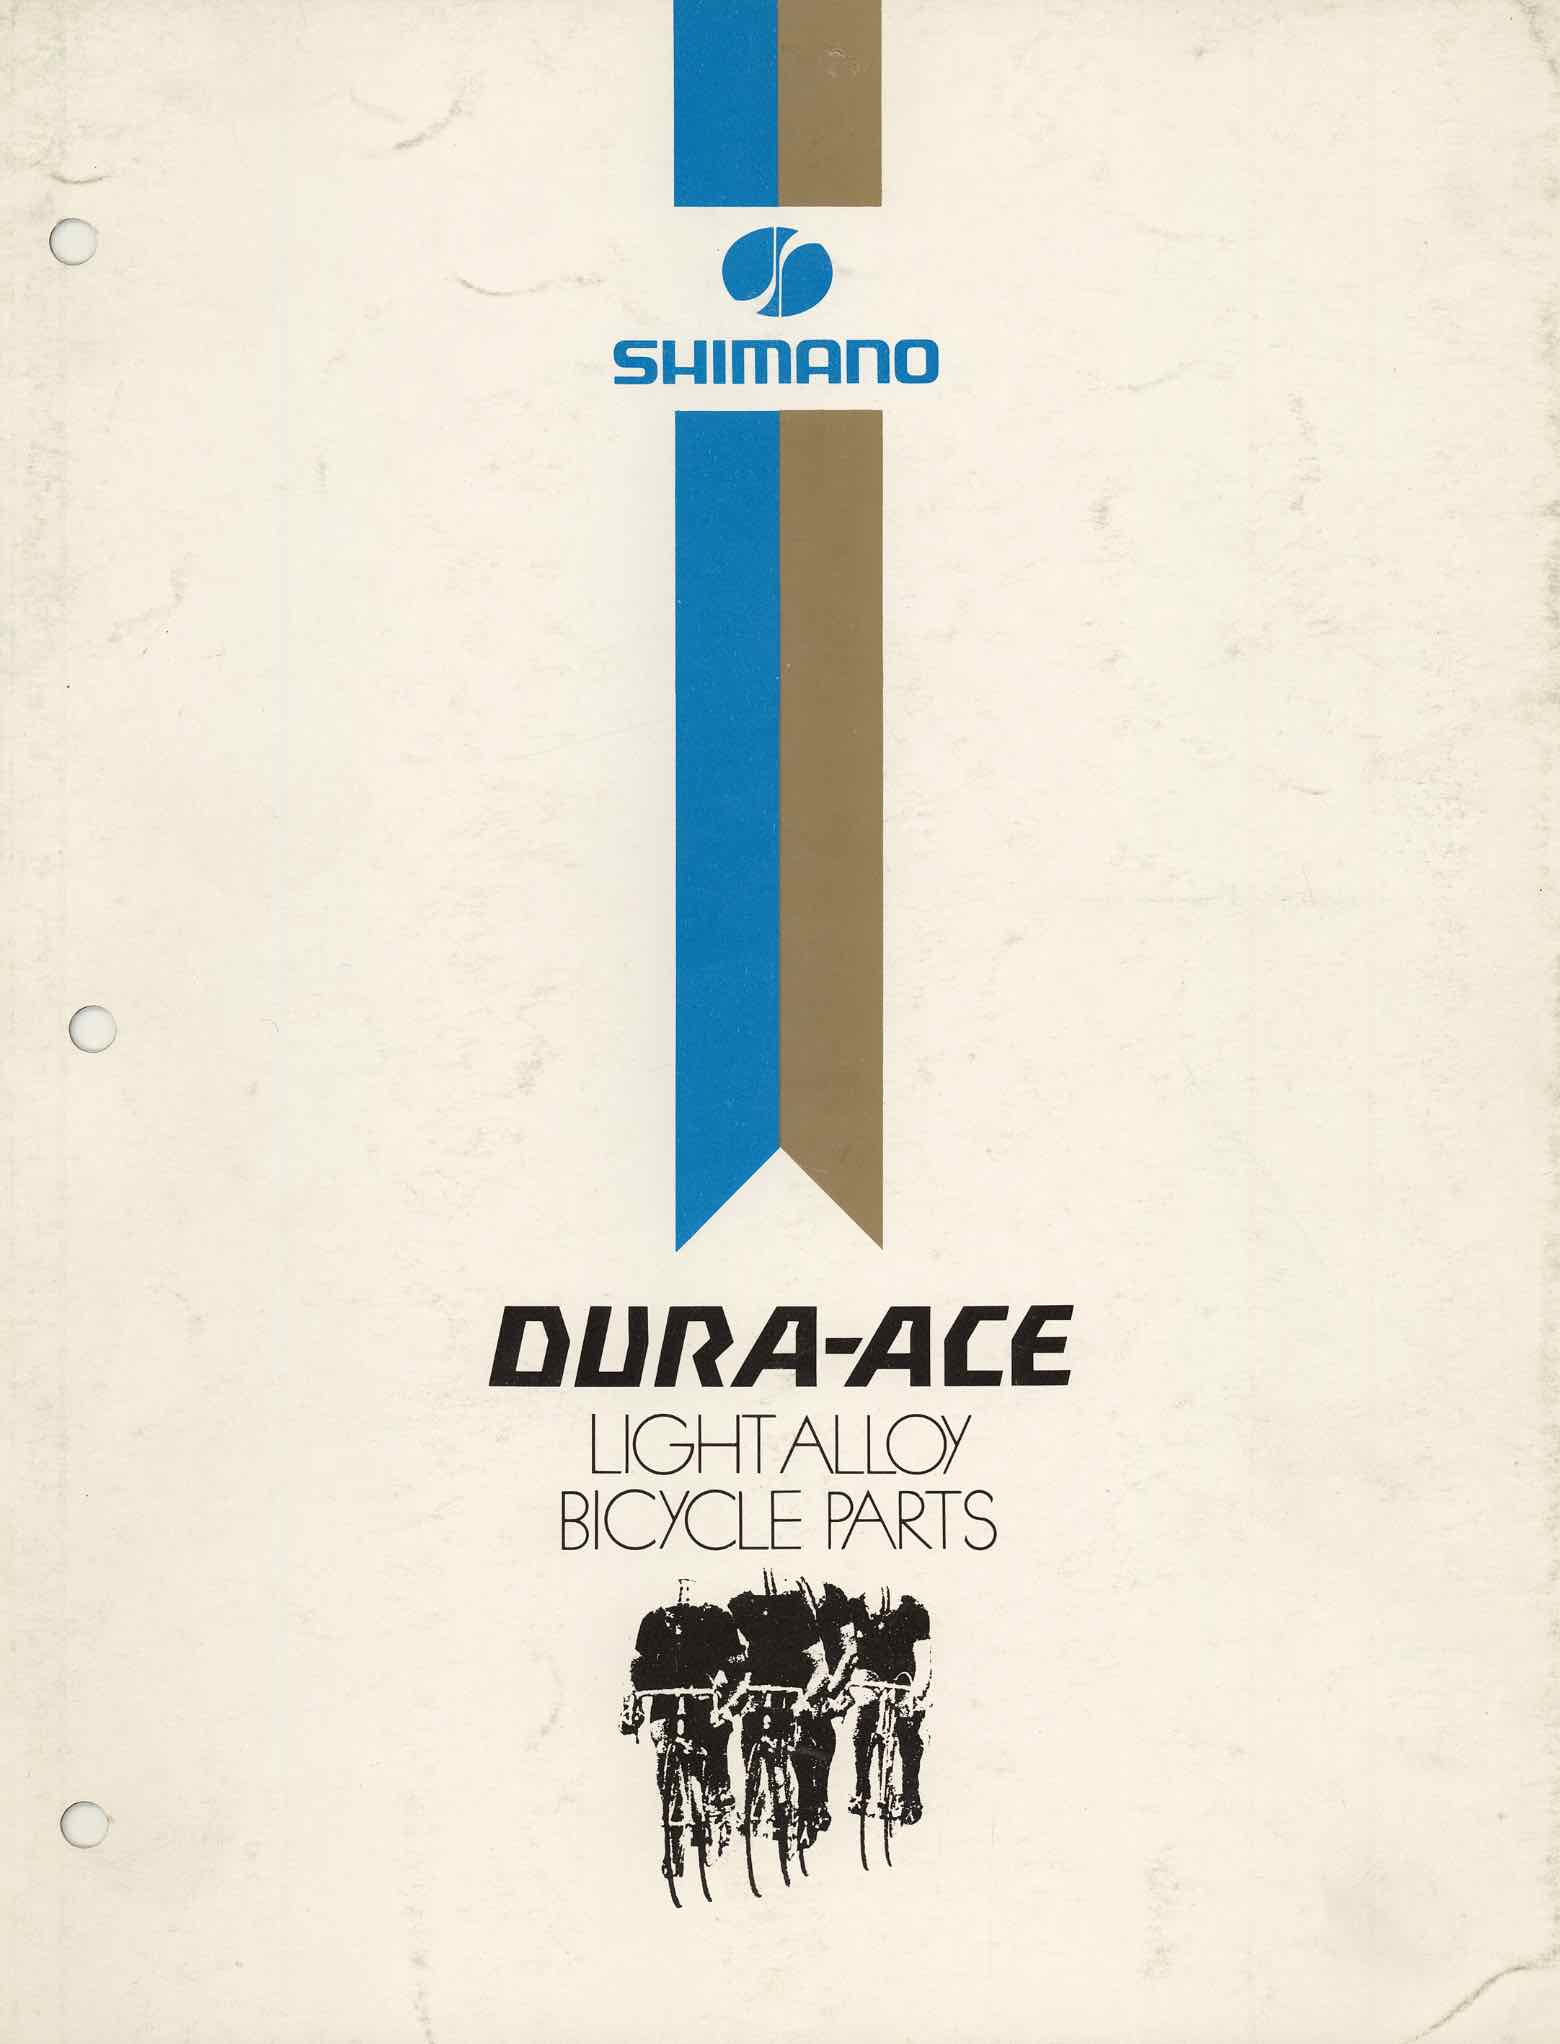 Shimano Dura-Ace Light Alloy Bicycle Parts - scan 1 main image